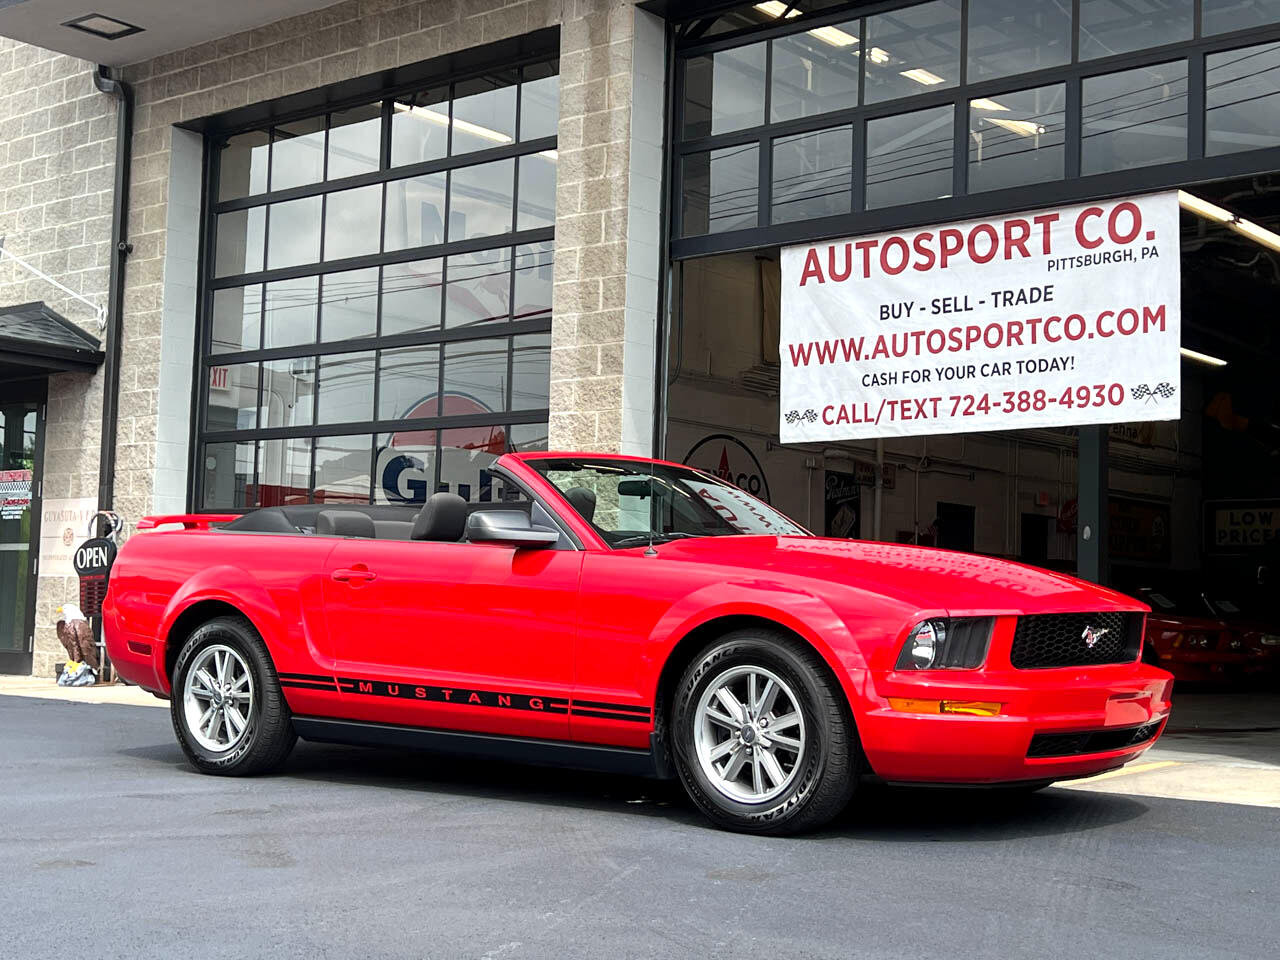 Ford Mustang V6 Deluxe Convertible 2005